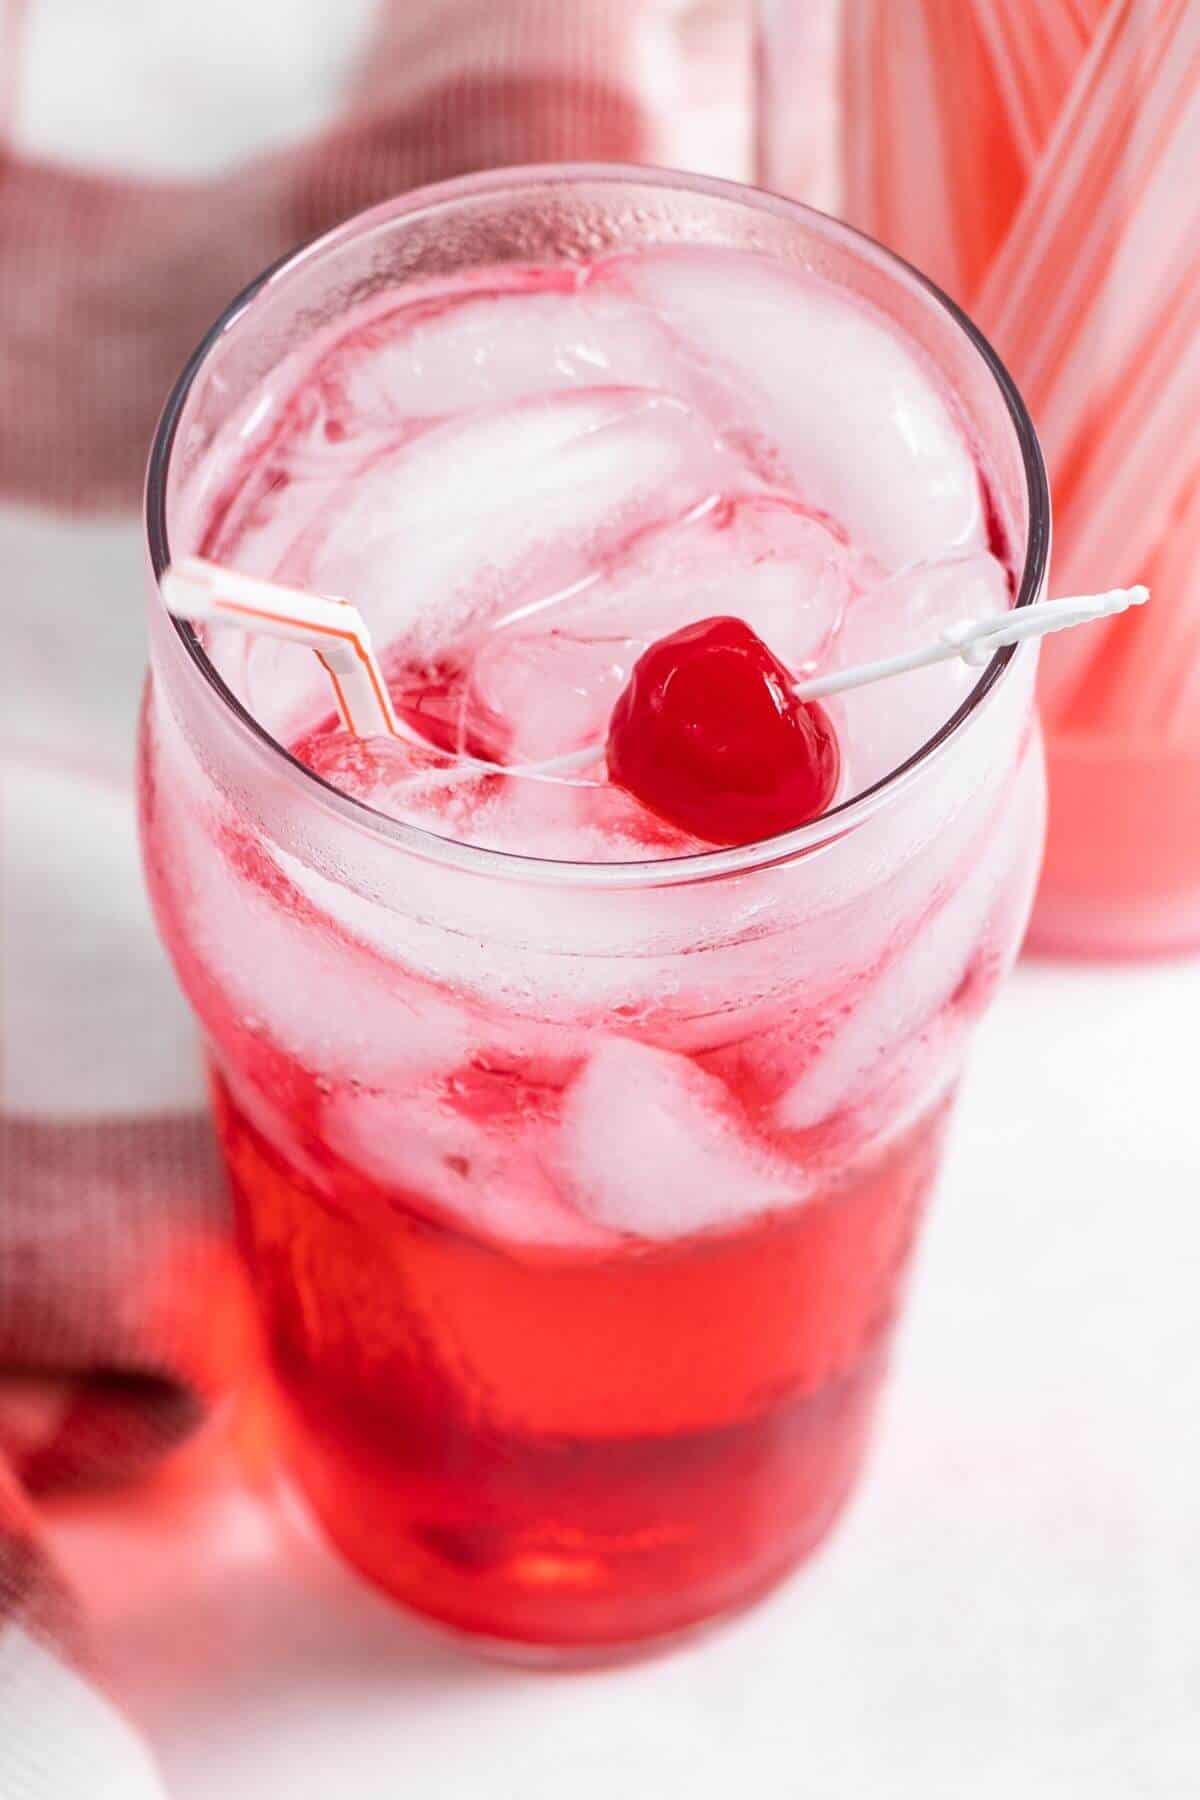 Angled top view of Shirley Temple drink.